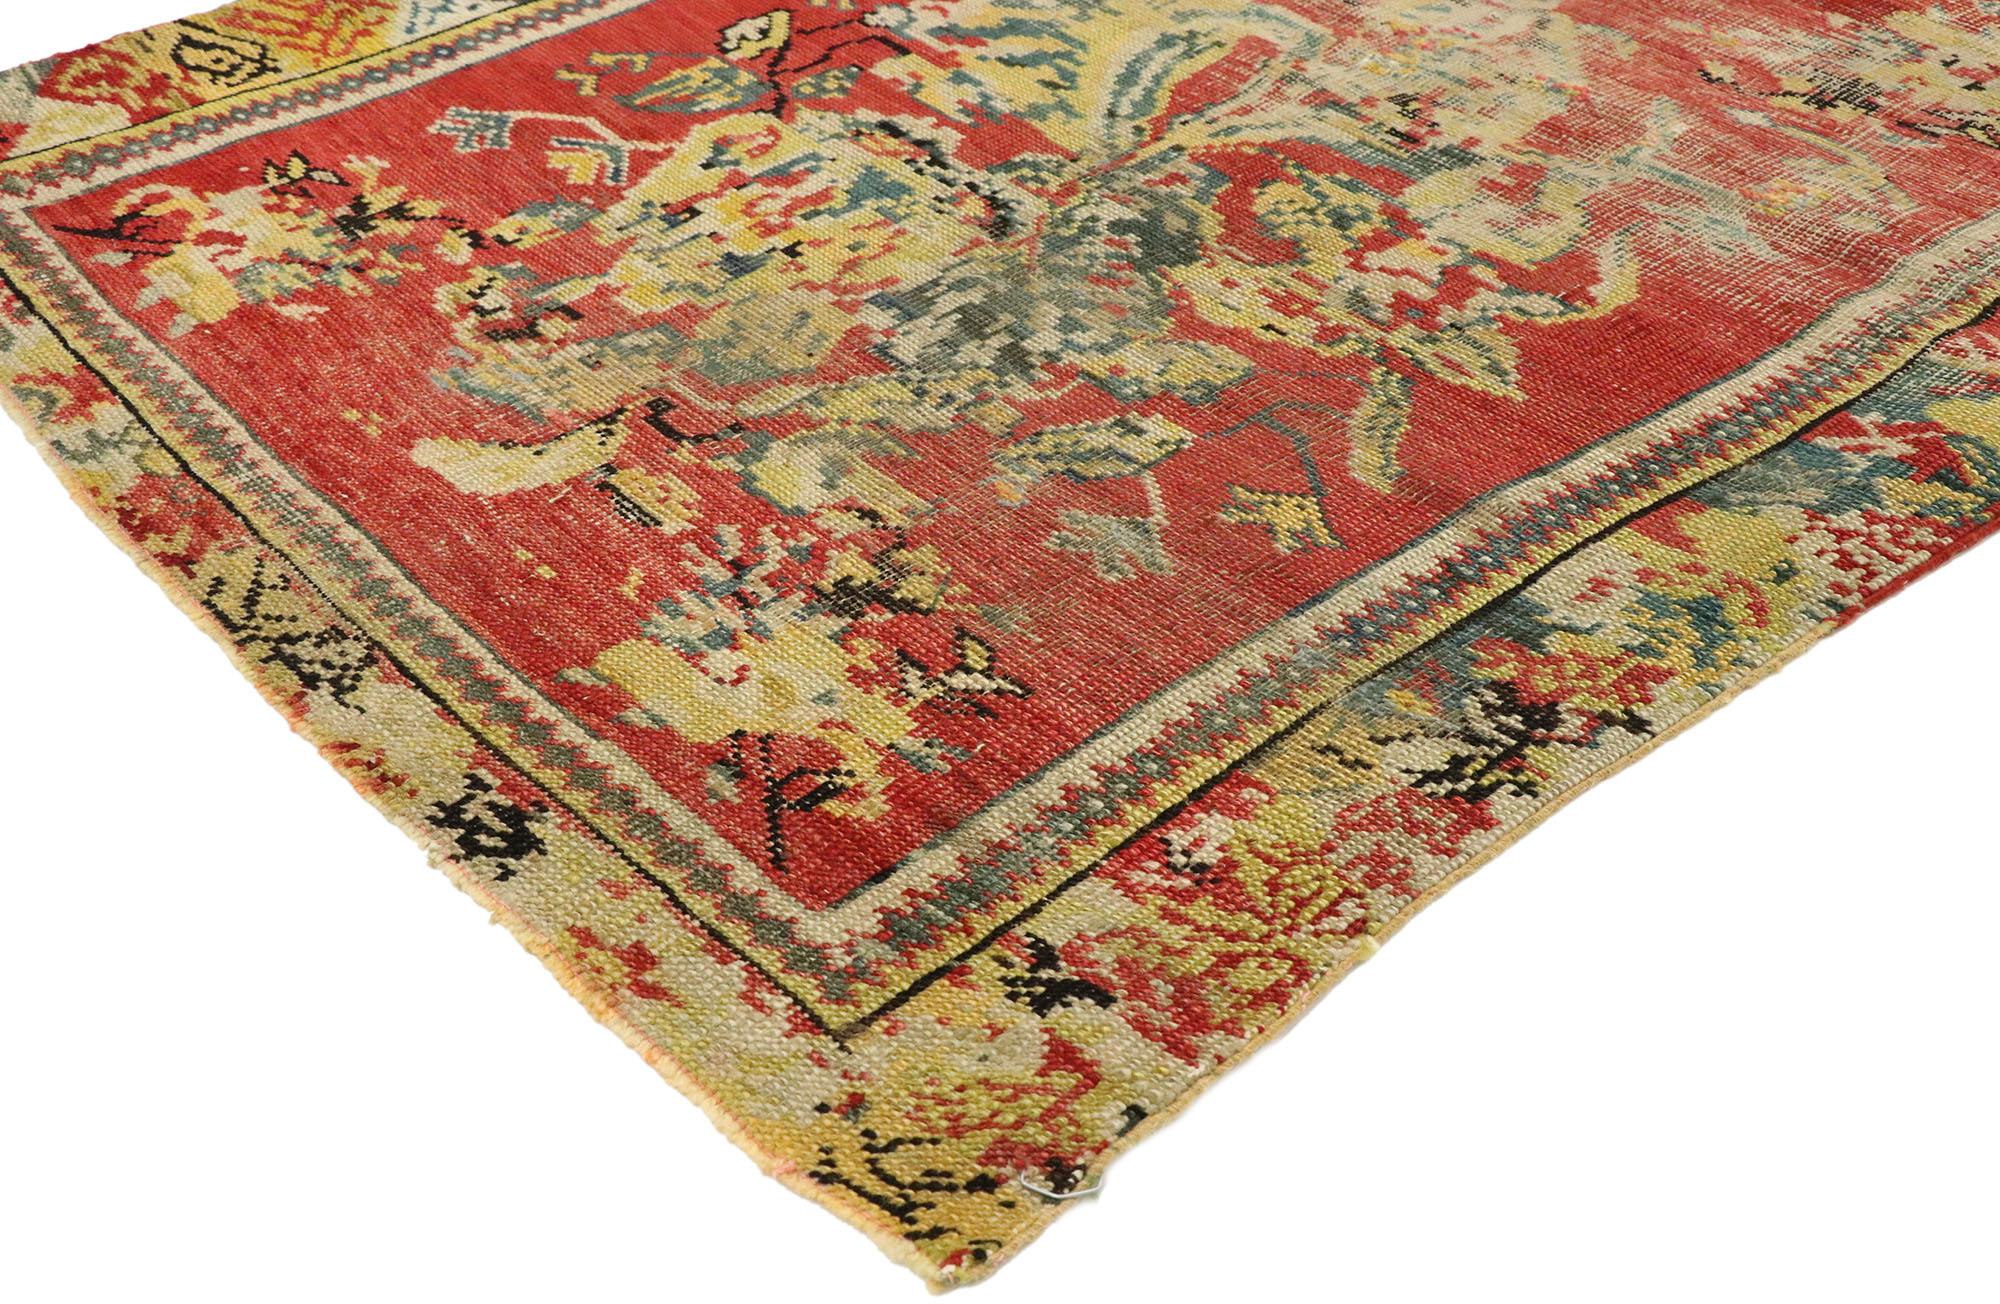 51568, distressed antique Turkish Oushak prayer rug with English country cottage style, entry or foyer rug. Turkish traditional patterns meet rich colors and an intimate patina in this distressed antique Turkish Oushak rug. A niche motif, typical of